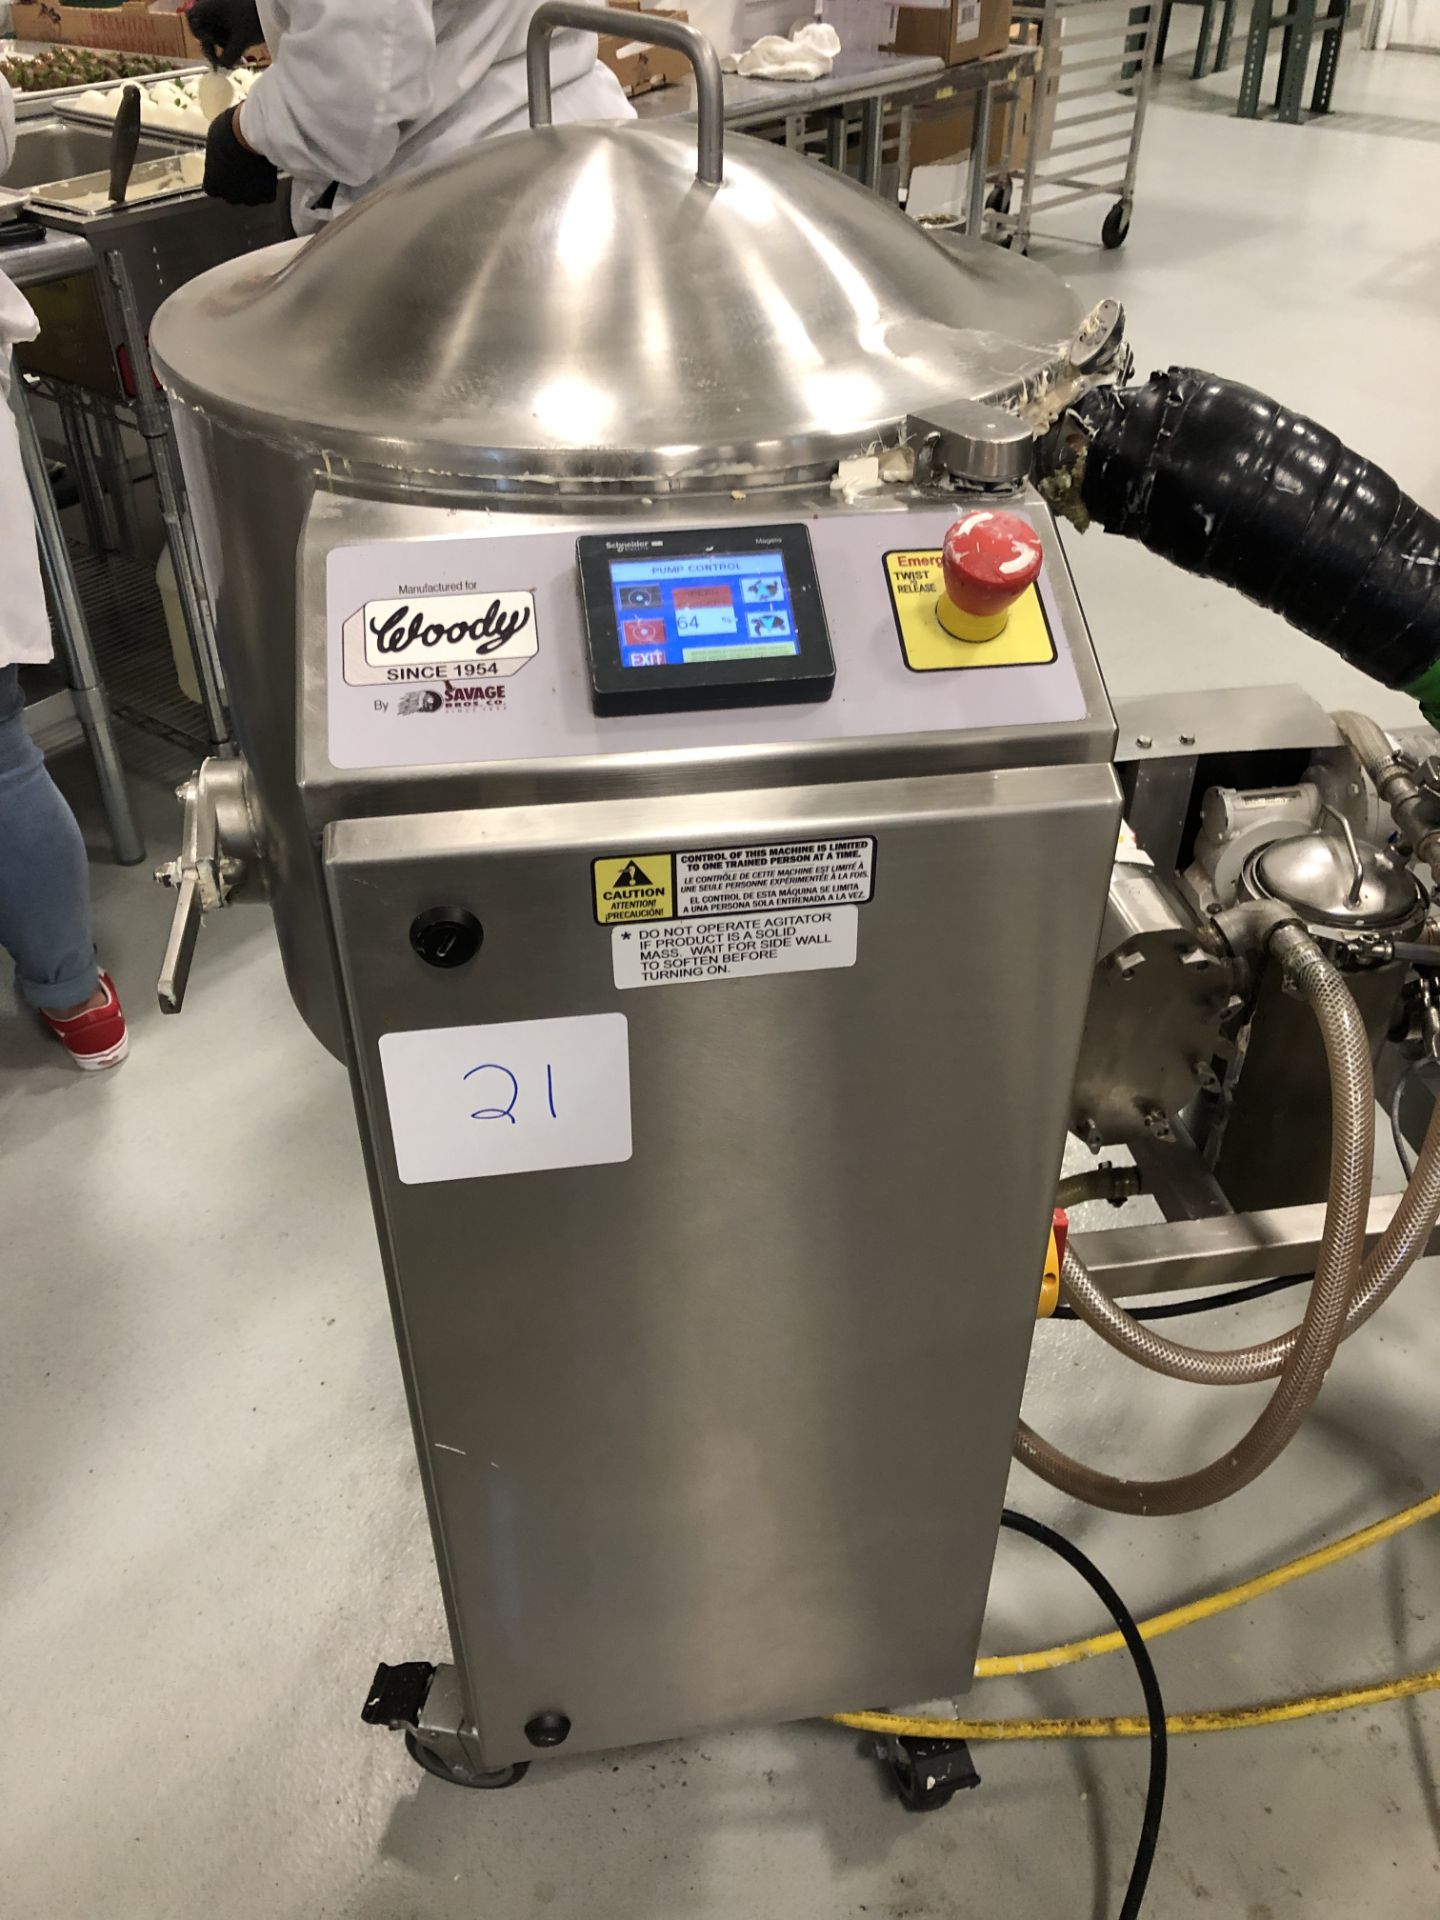 Savage/Woody 125 lb Stainless Steel Chocolate Melter with Touchscreen controls, jacketed and